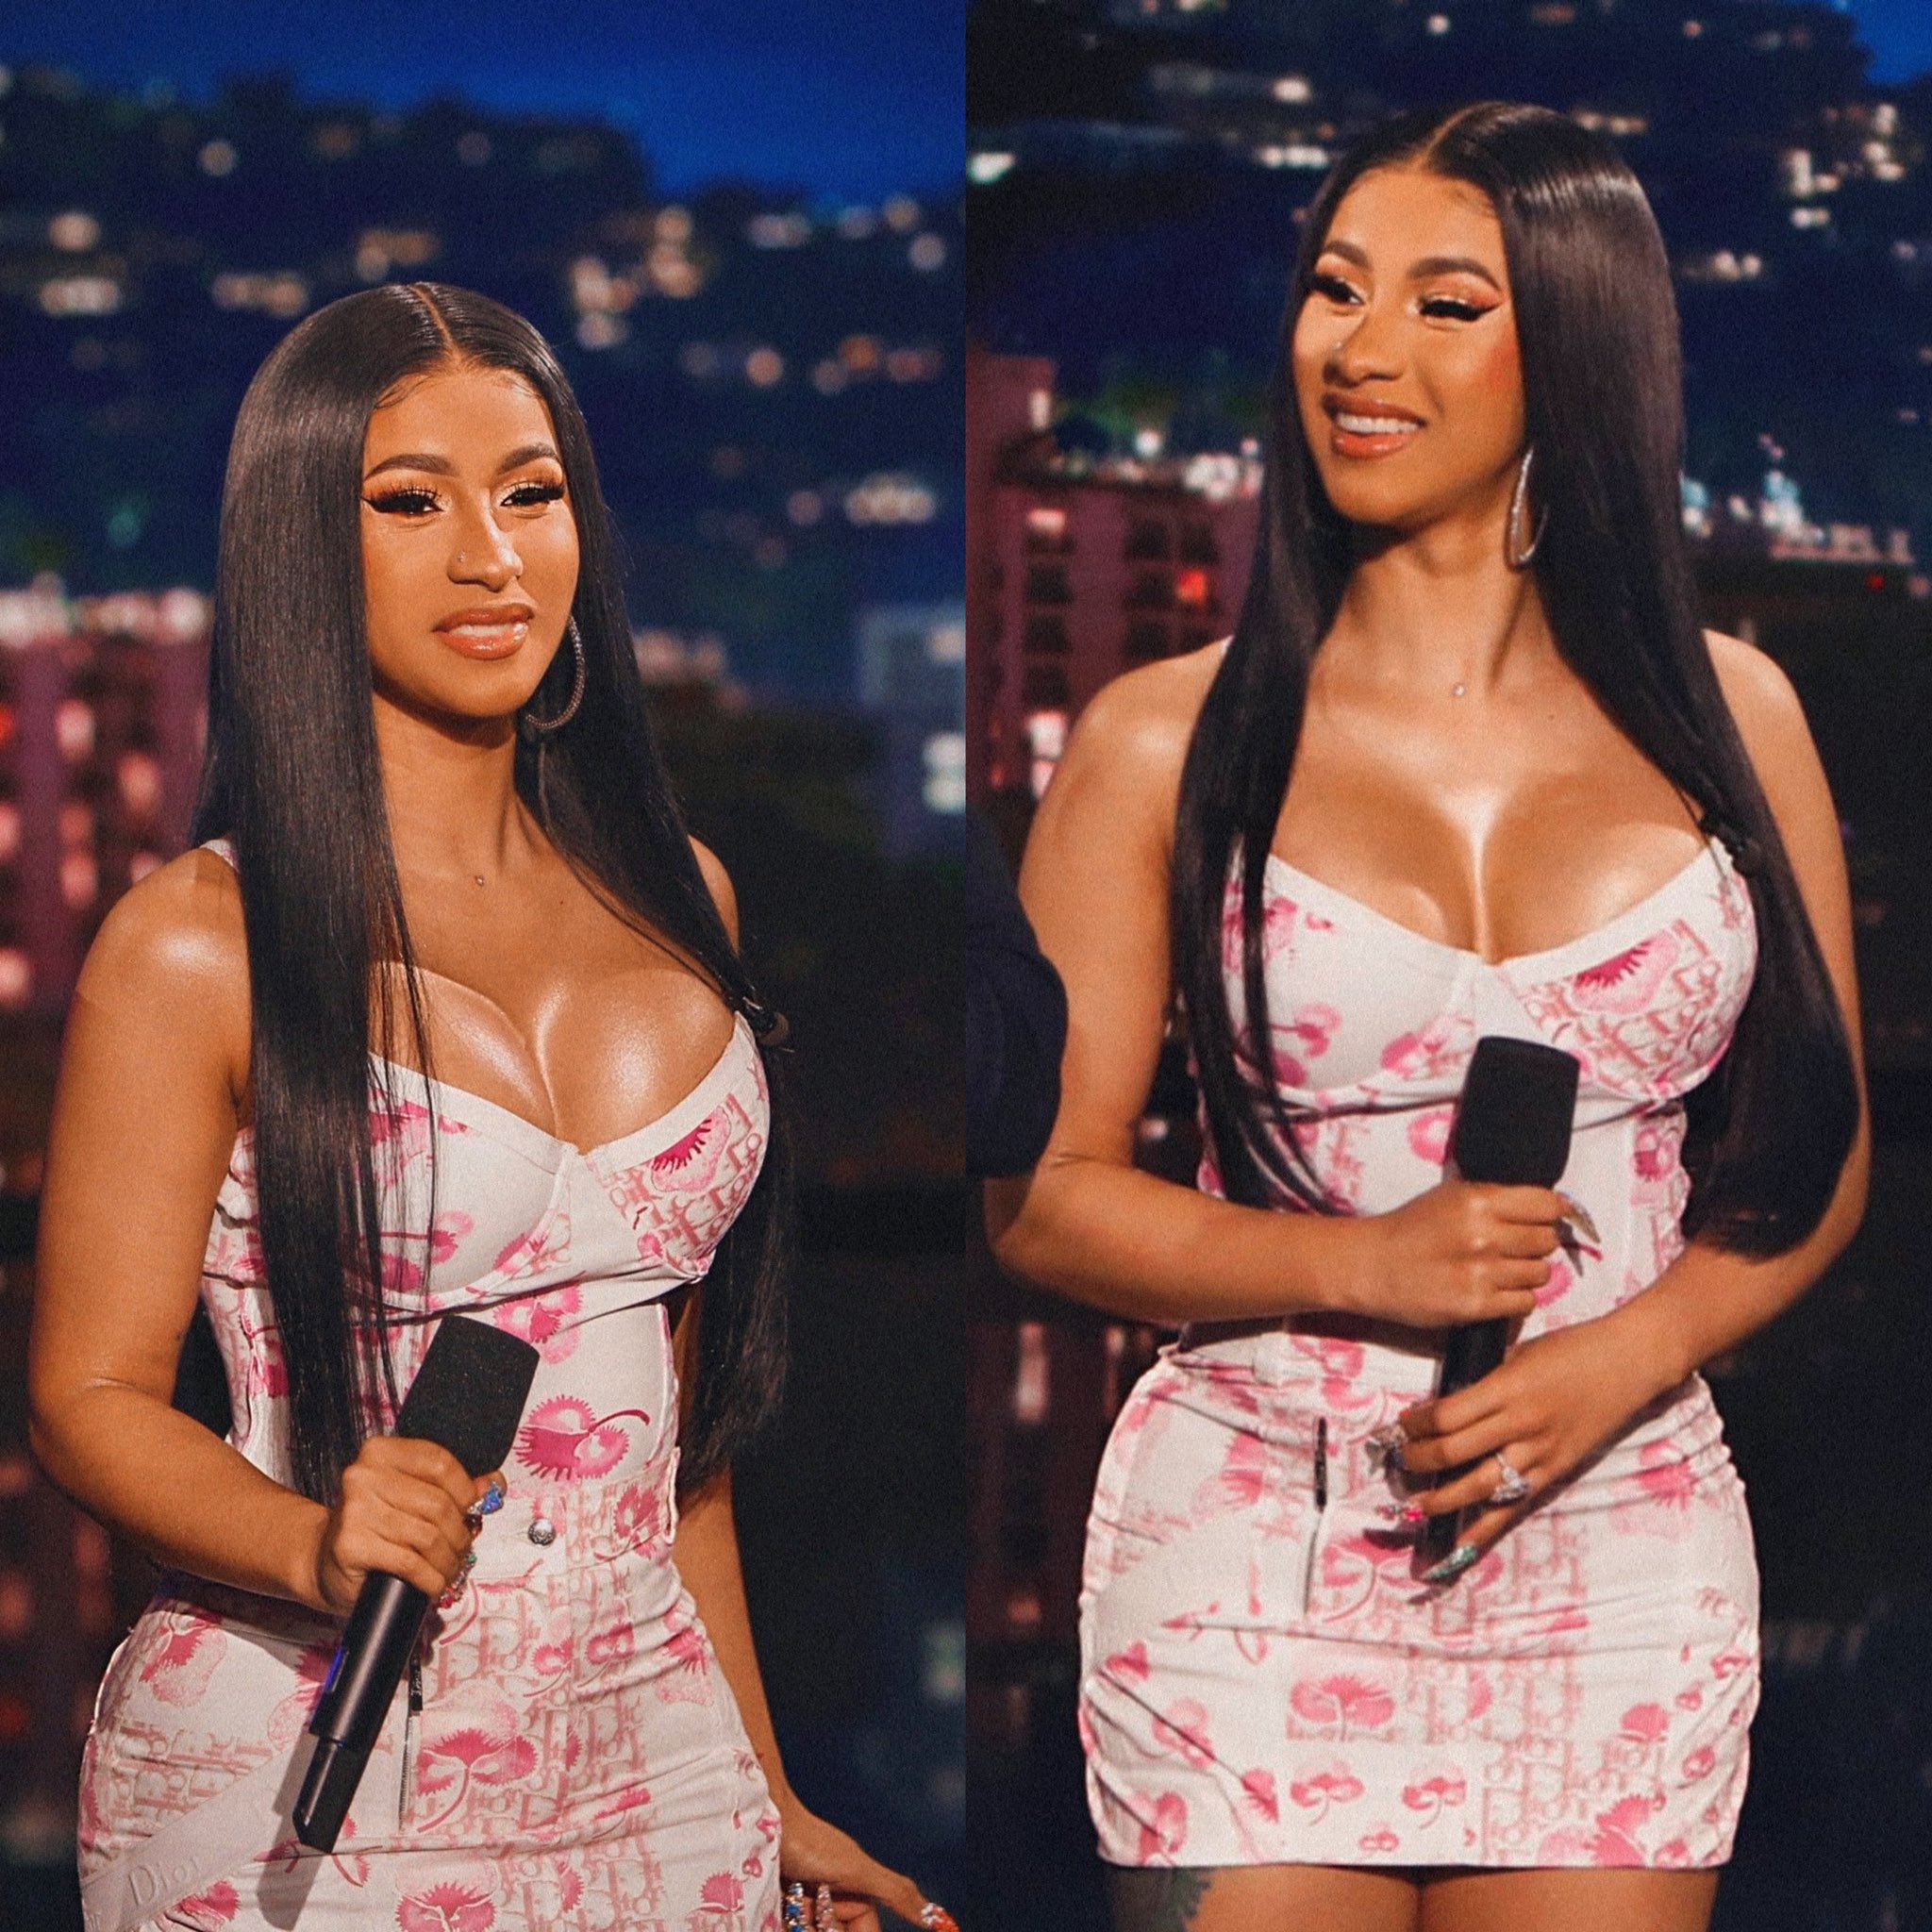 𝗛𝗼𝘂𝗿𝗹𝘆 𝗖𝗮𝗿𝗱𝗶 𝗕🍭 on X: cardi b is so adorable🌷.   / X